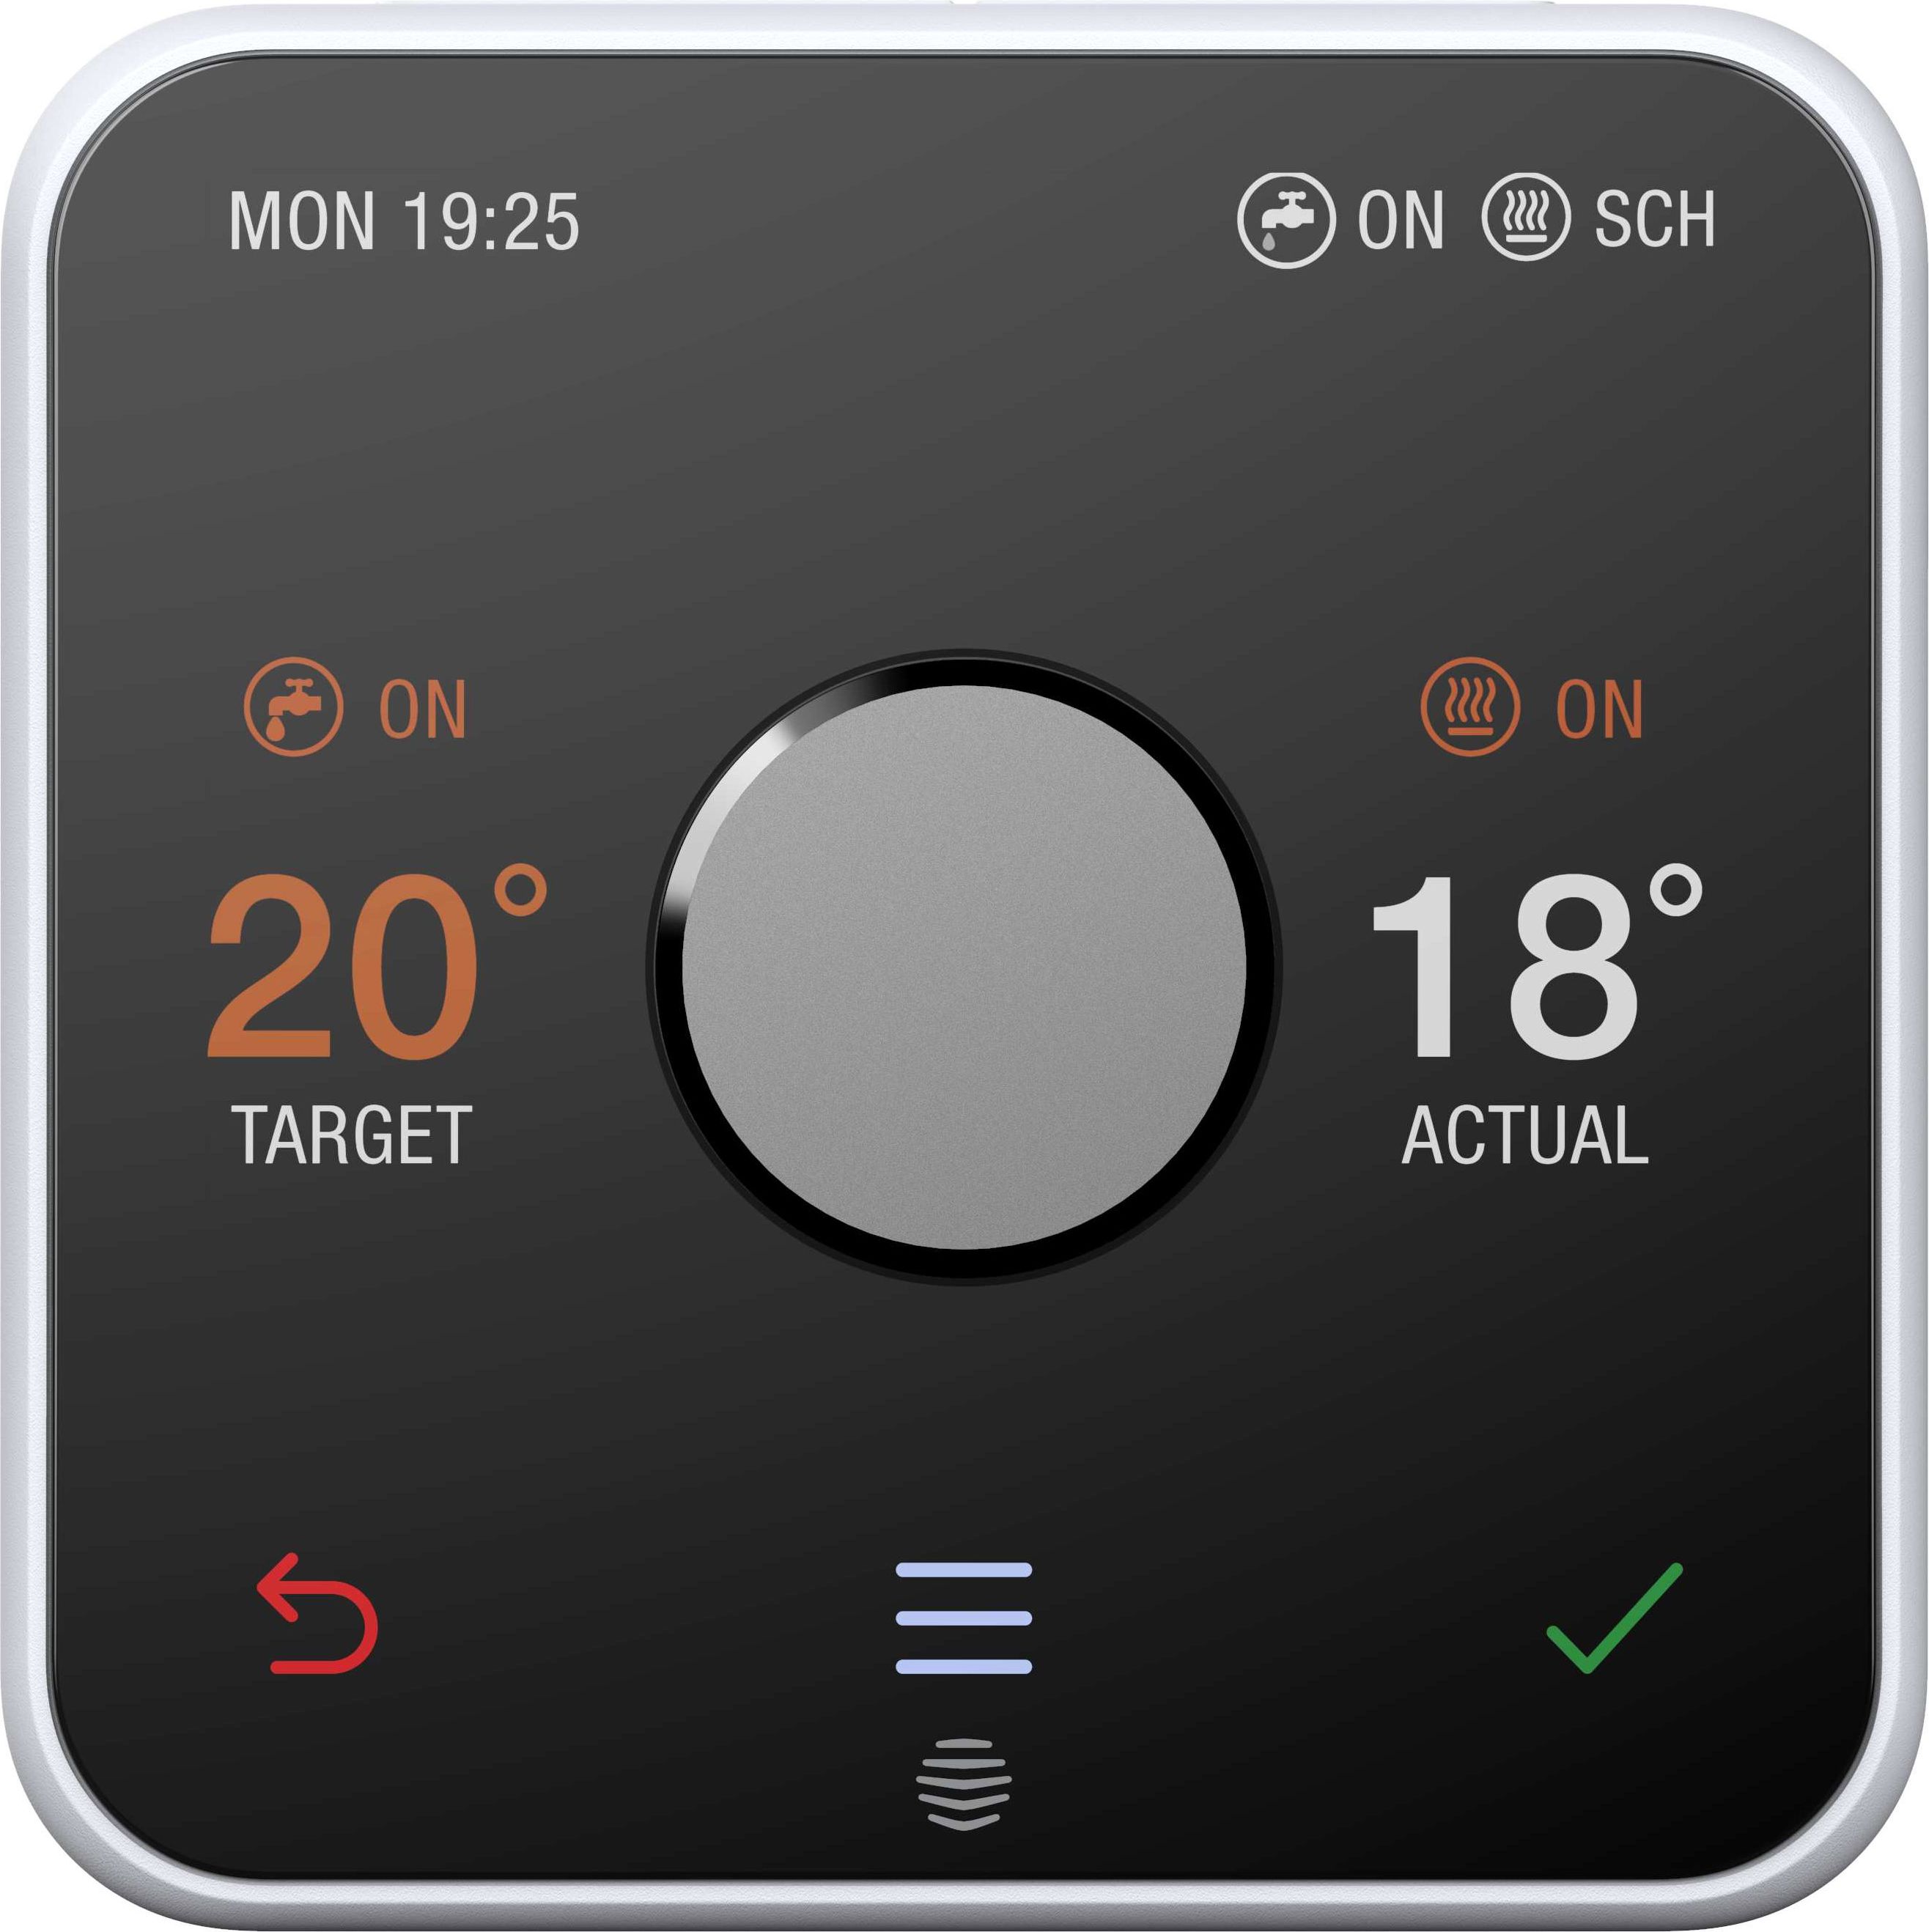 Hive Active Heating For Conventional Boiler Smart Thermostat - Requires Professional Install - White, White